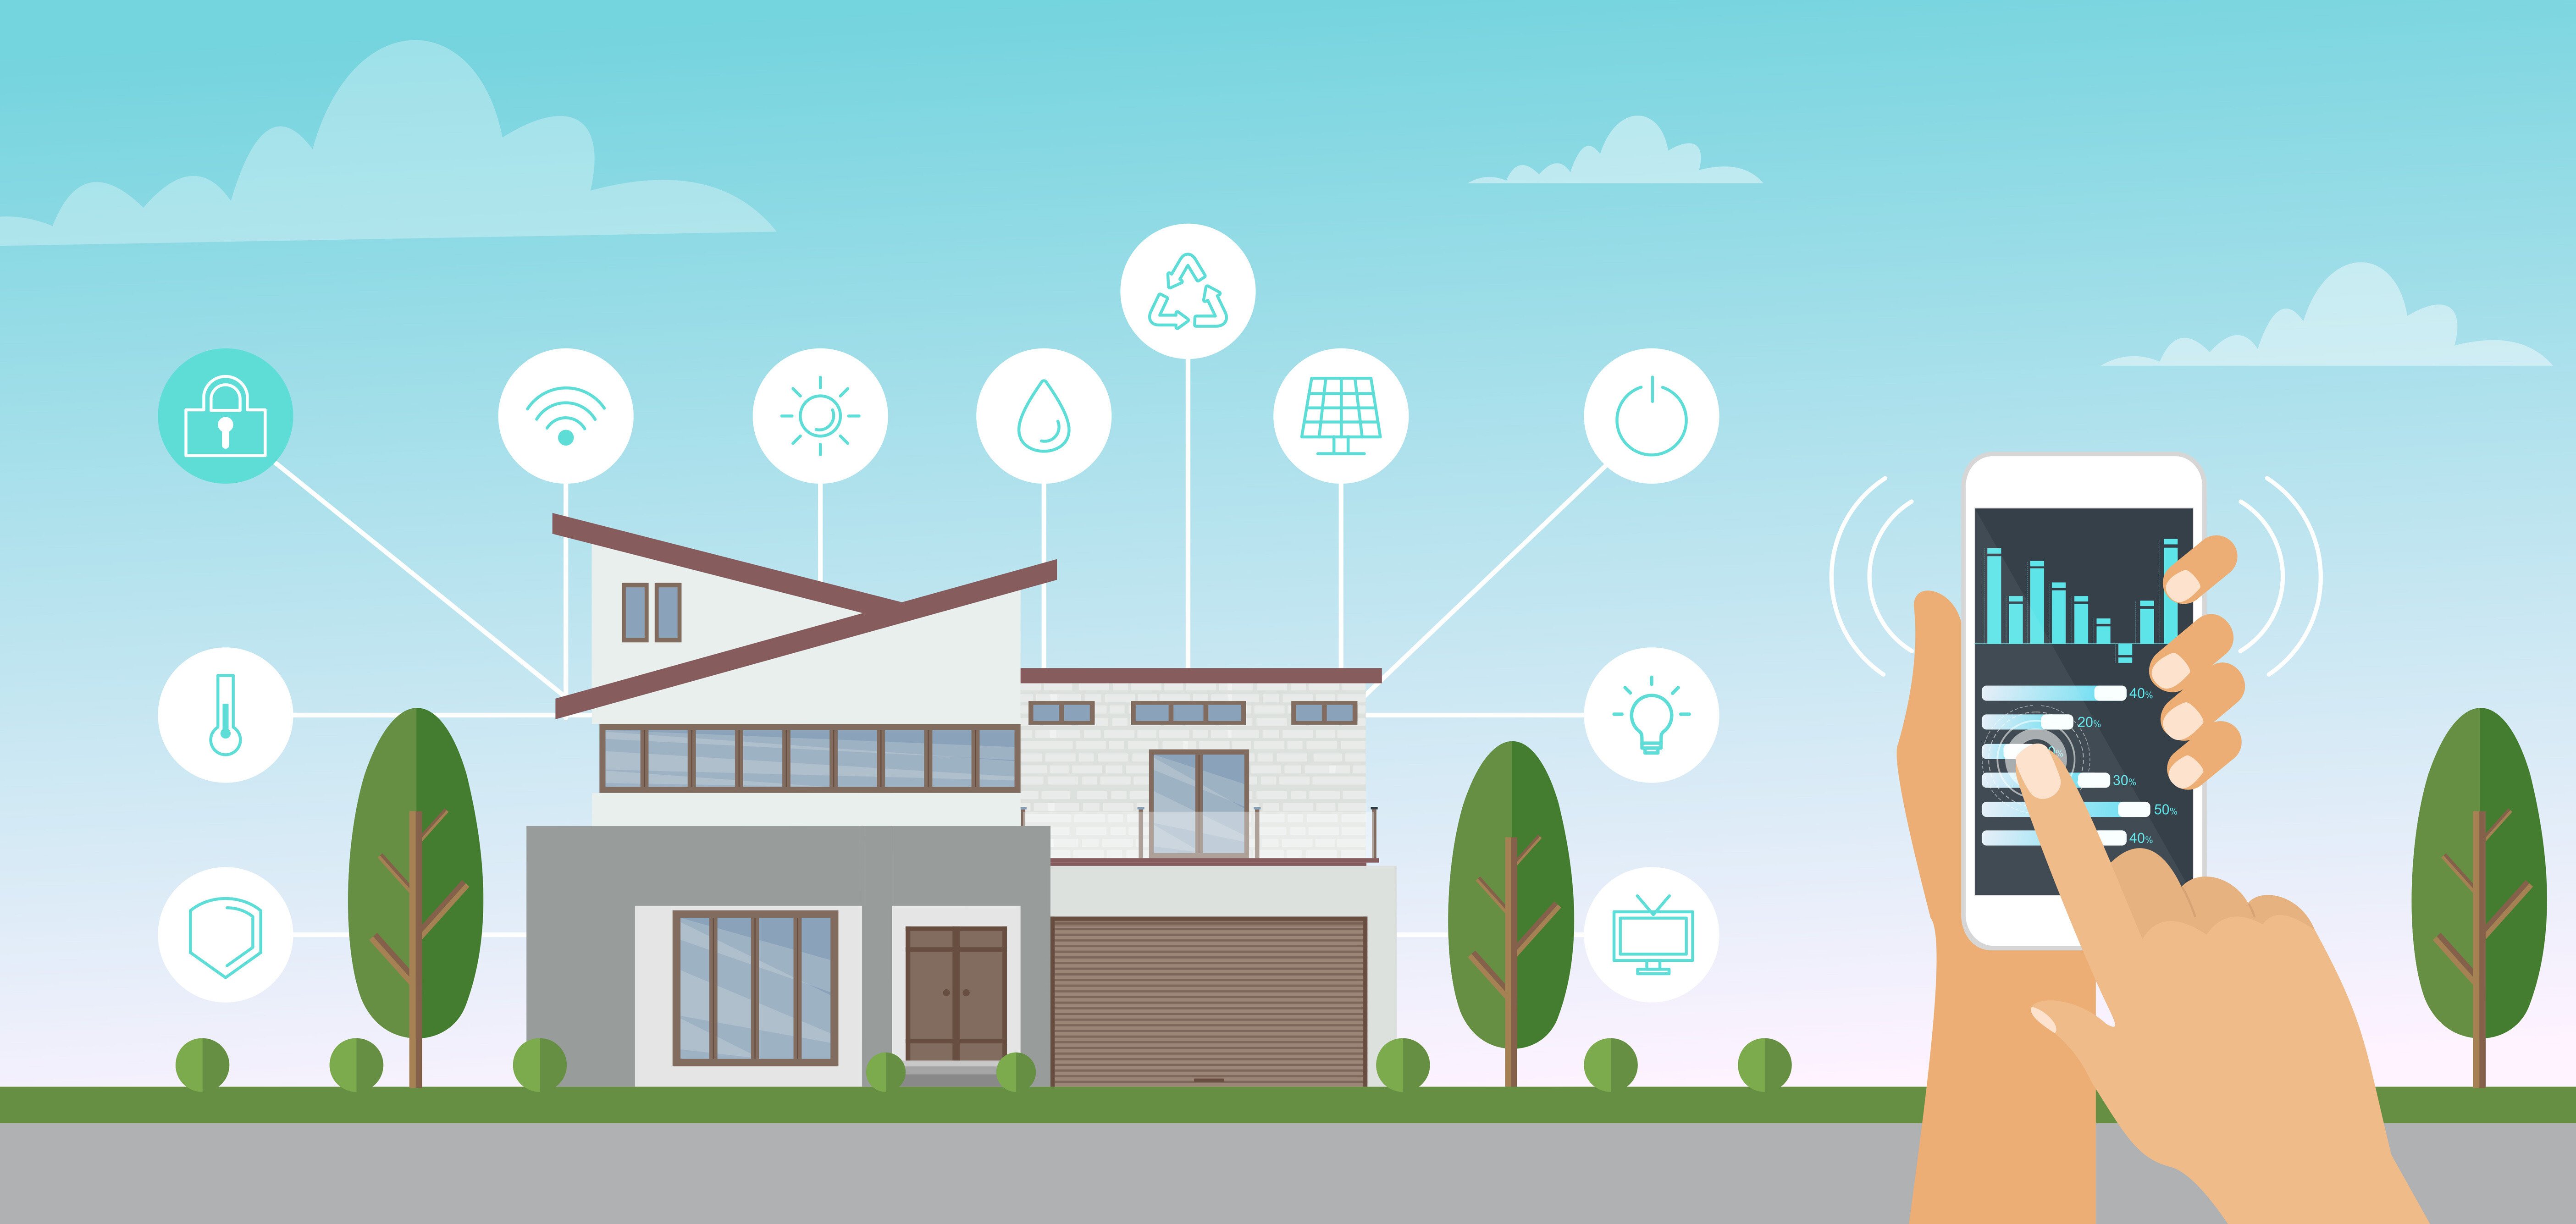 An infographic of the front of a home with different smart home features emanating from it.